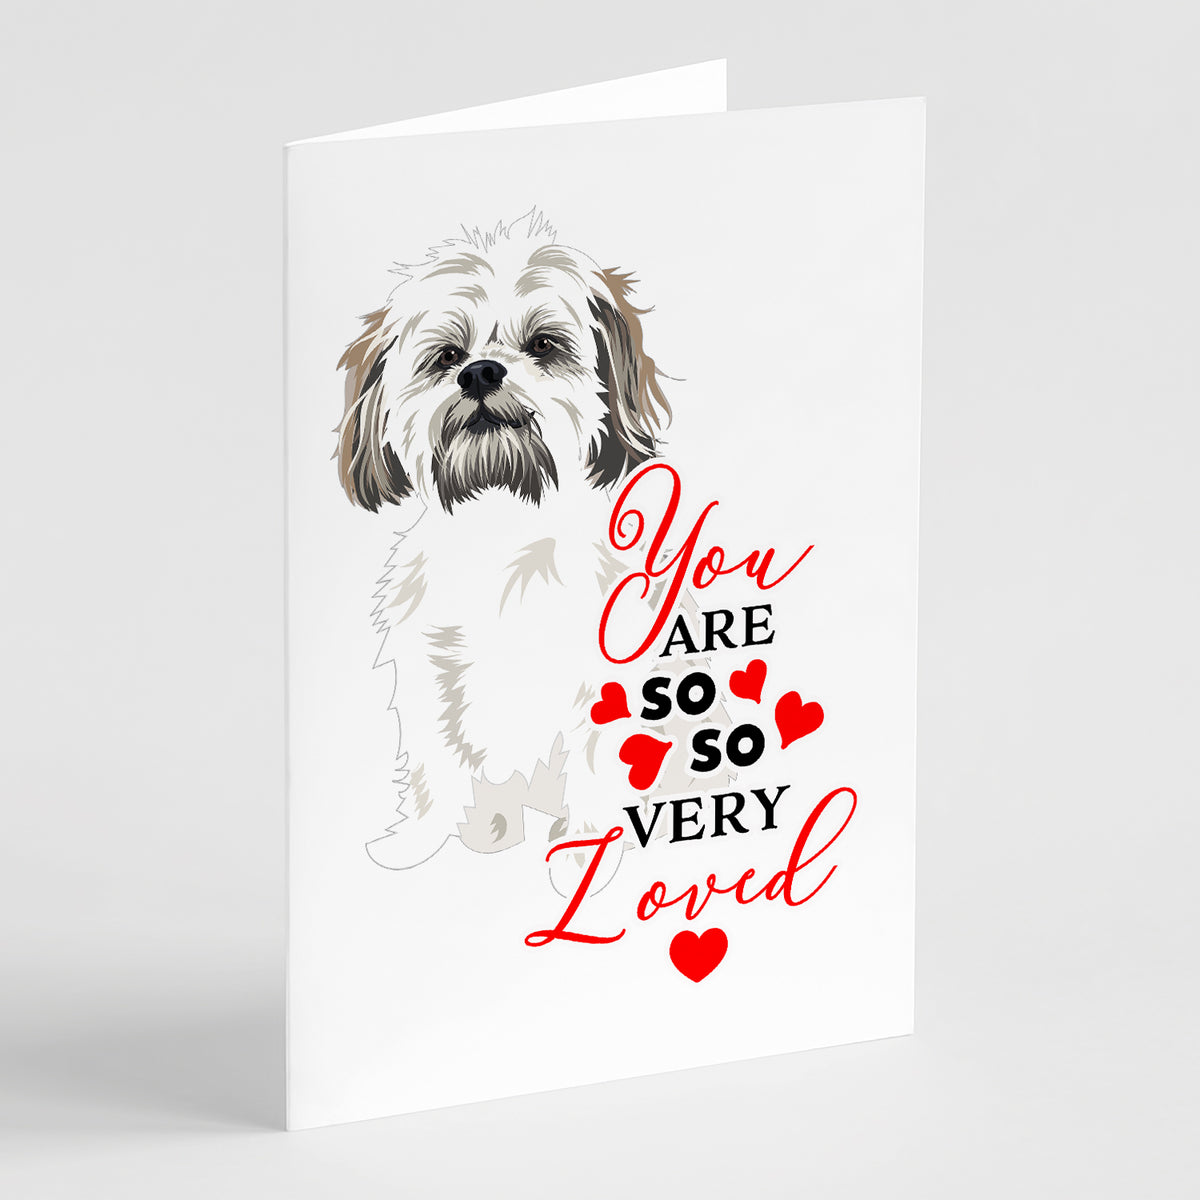 Buy this Shih-Tzu Silver Gold and White #1 so Loved Greeting Cards and Envelopes Pack of 8